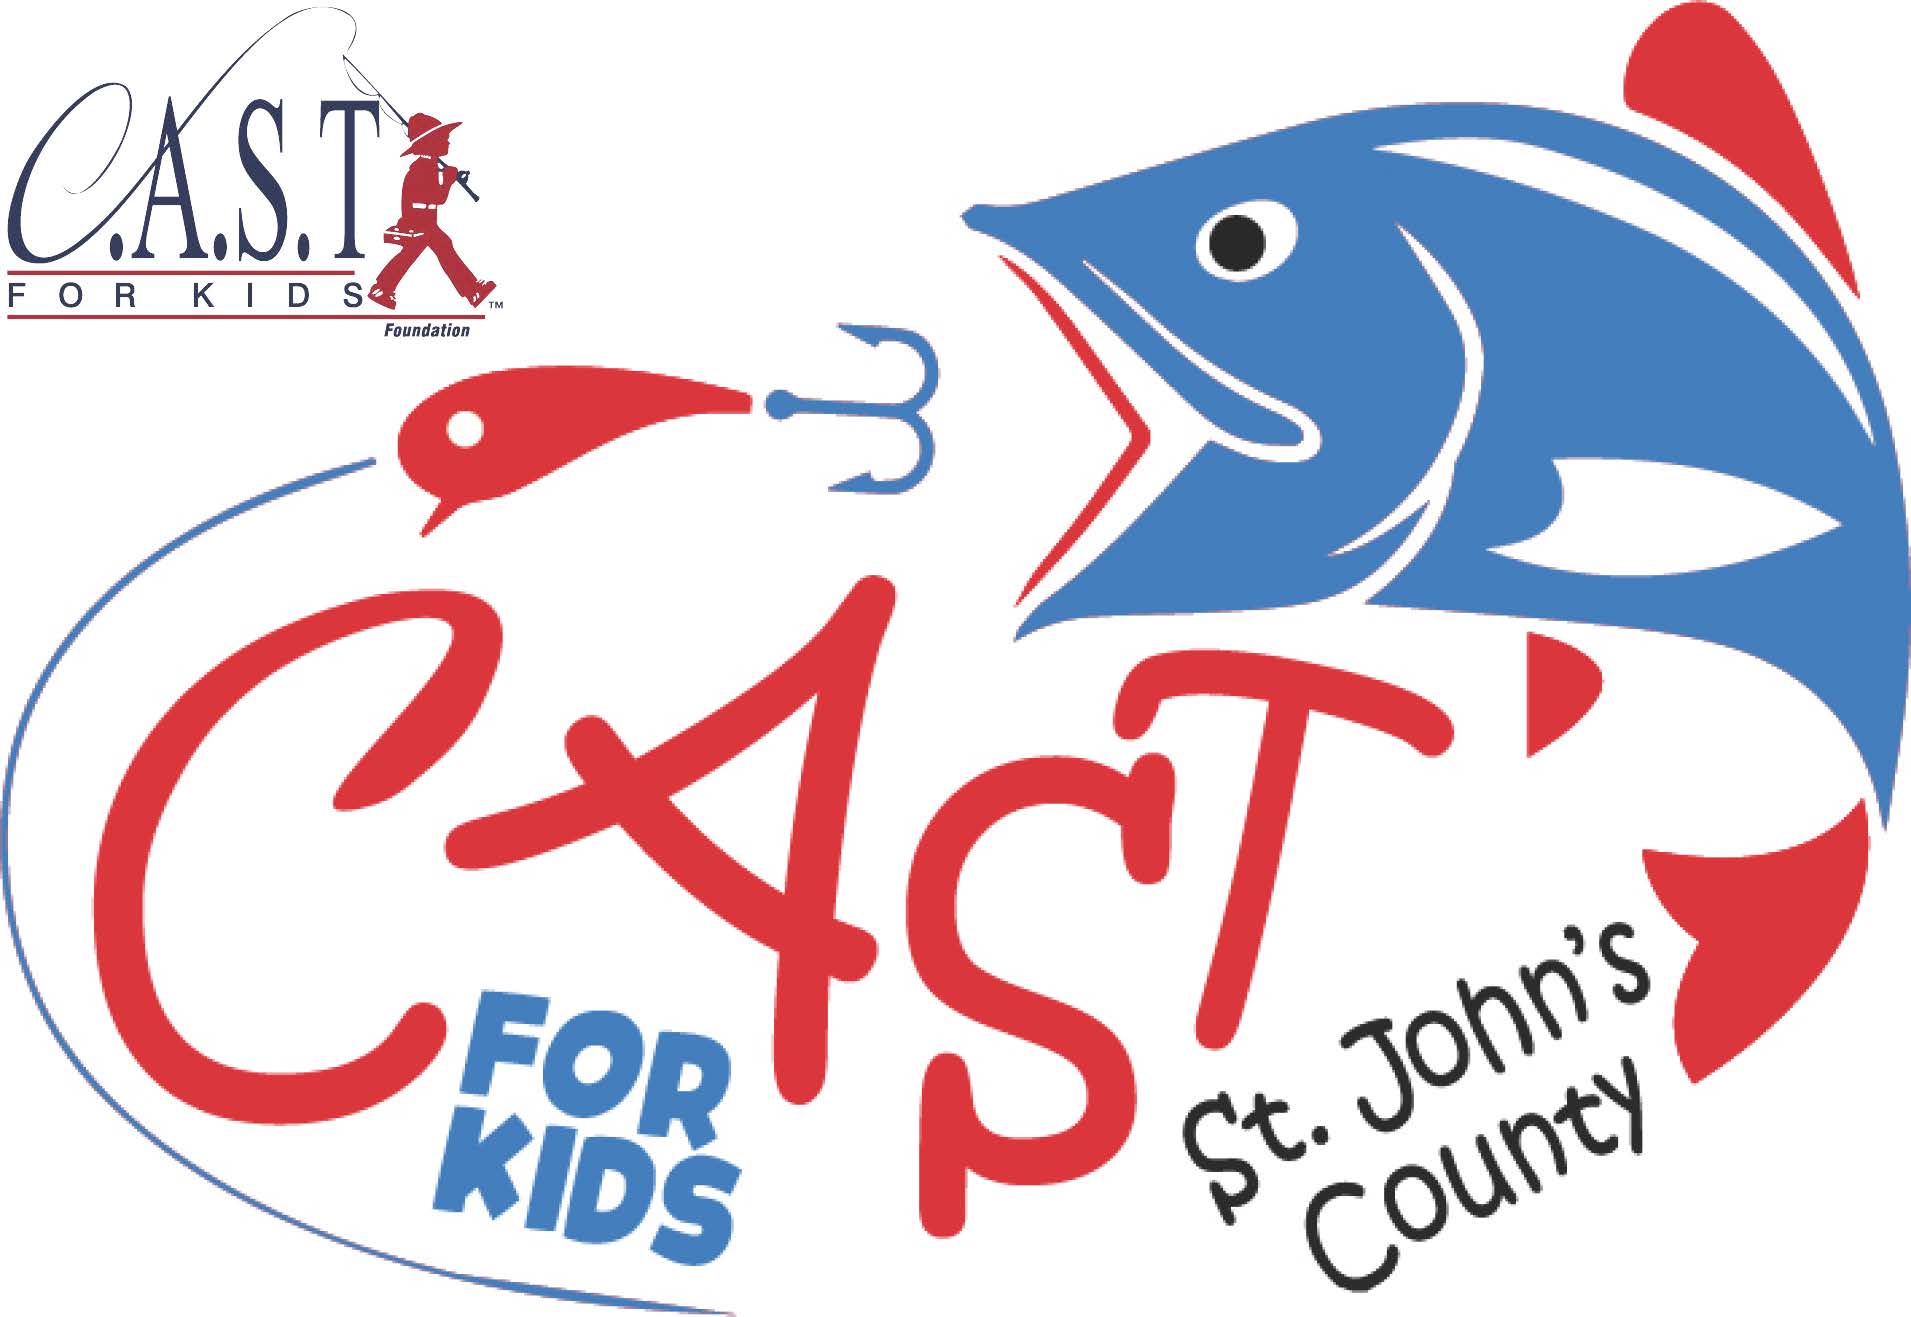 c-a-s-t-for-kids-st-johns-county-cast-for-kids-foundation